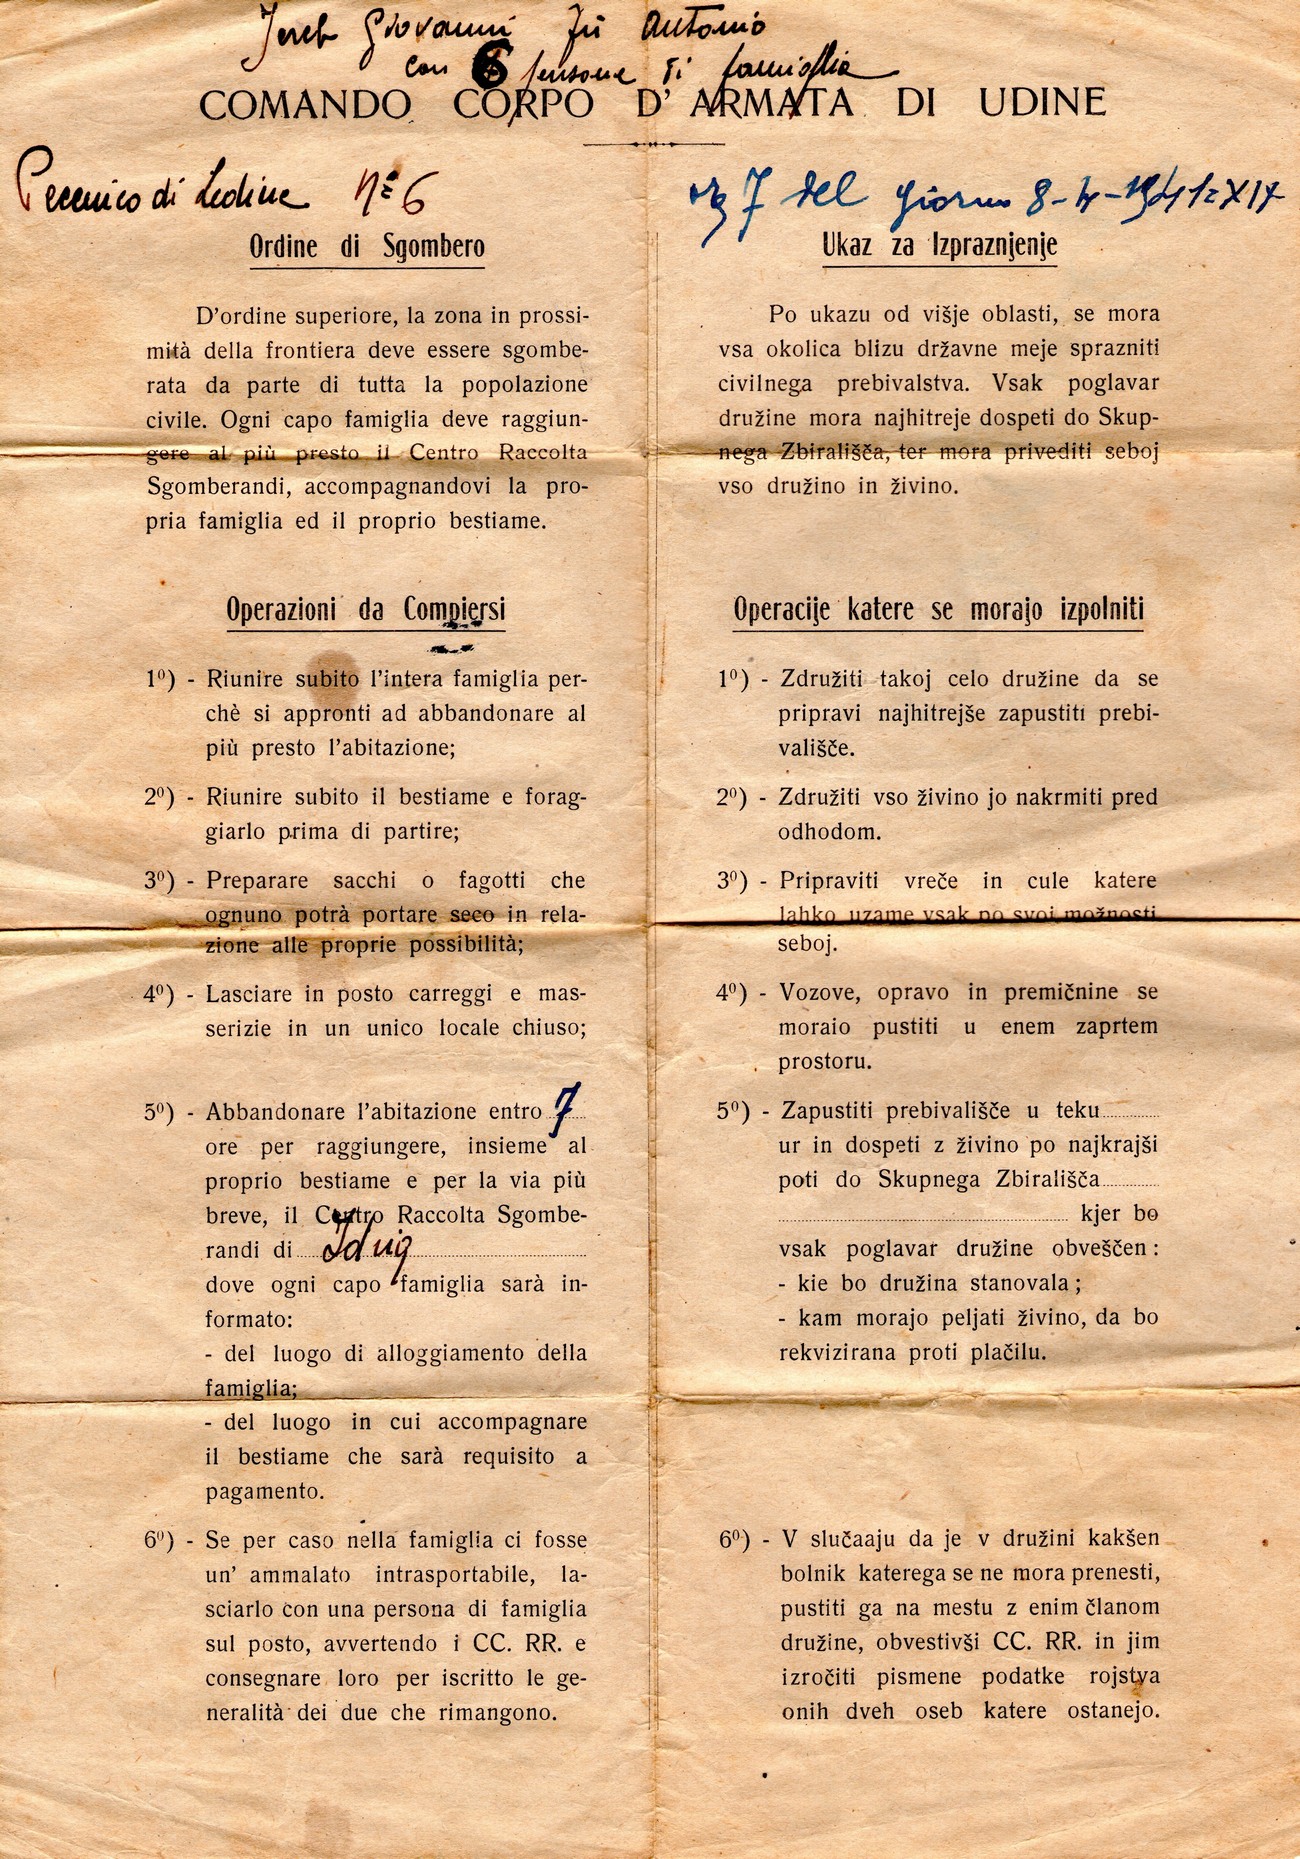 Immediately before the Italian attack on Yugoslavia, the Italian authorities ordered the people living in the villages on the border to evacuate their homes within a few hours. The photograph shows the evacuation order that was handed to Janez Jereb from Pečnik near Ledine on 8 April 1941. Private archive of Dušan Lapajne.